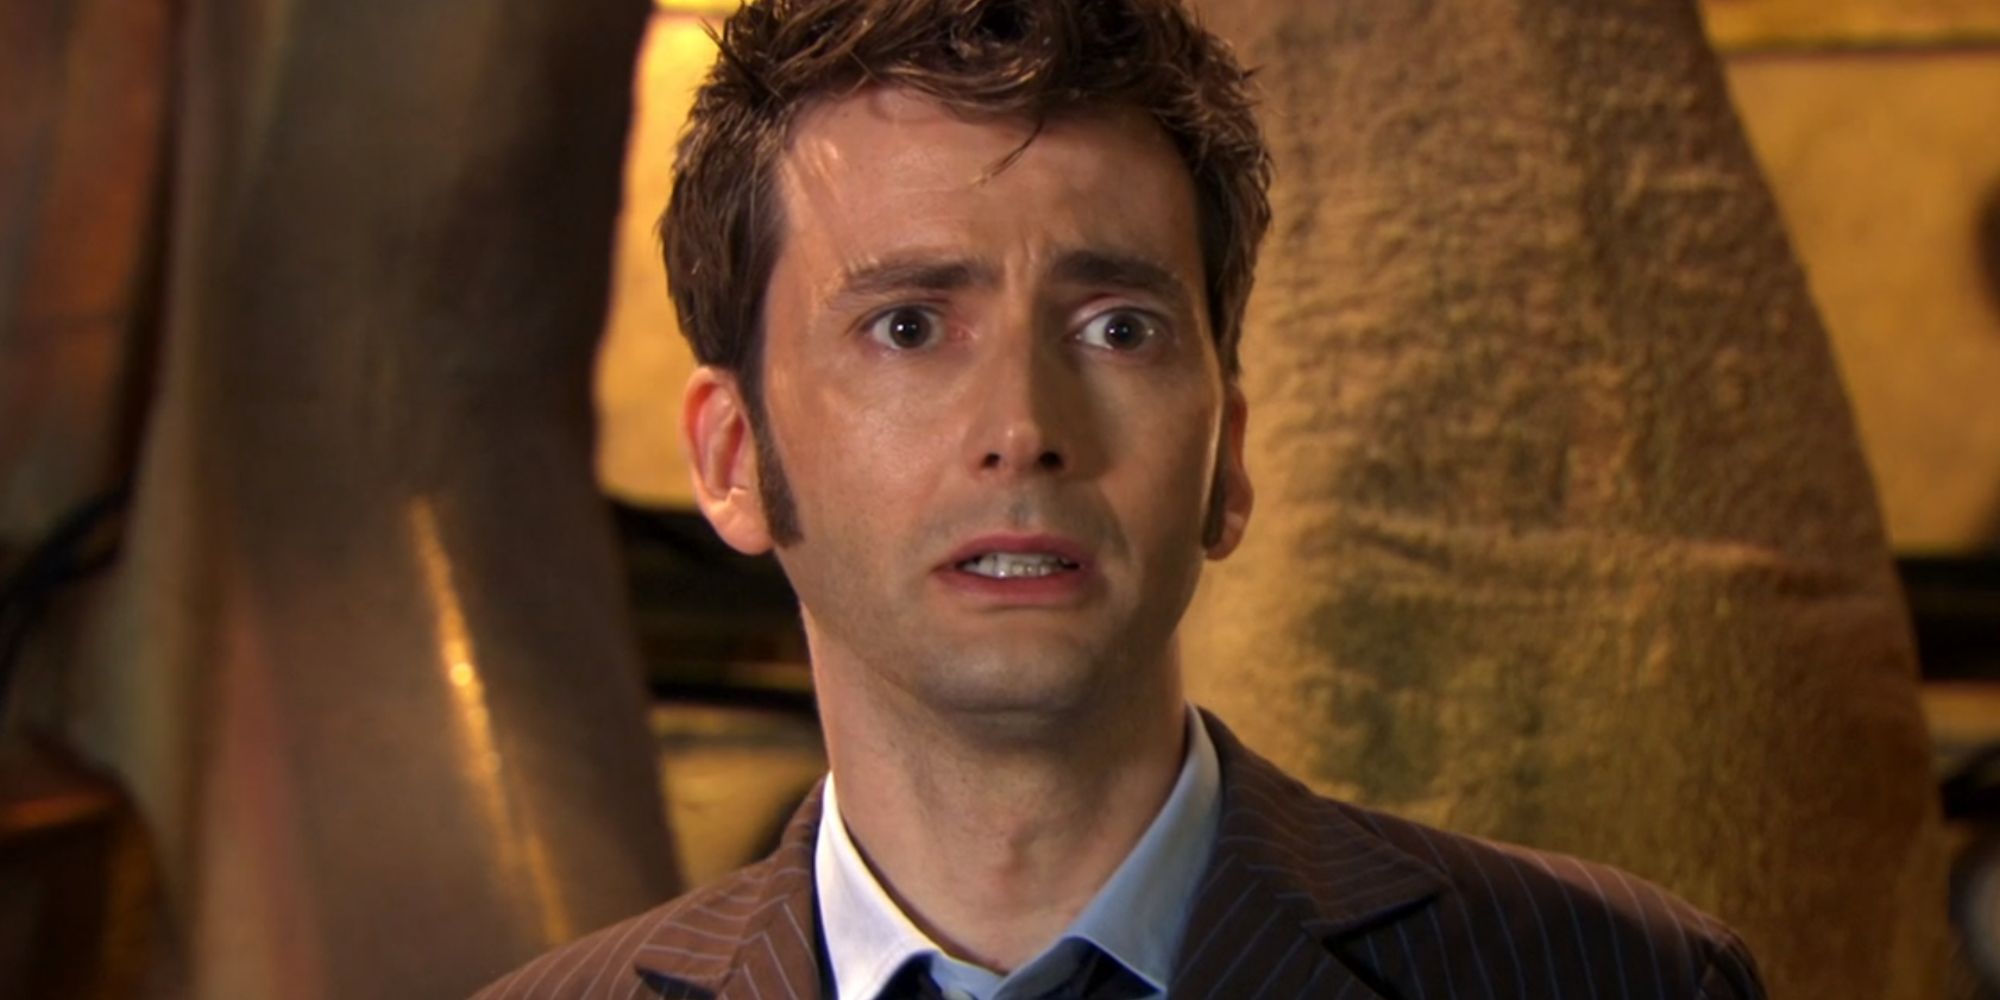 Doctor Who episode The End of Time with David Tennant as the Tenth Doctor before regenerating